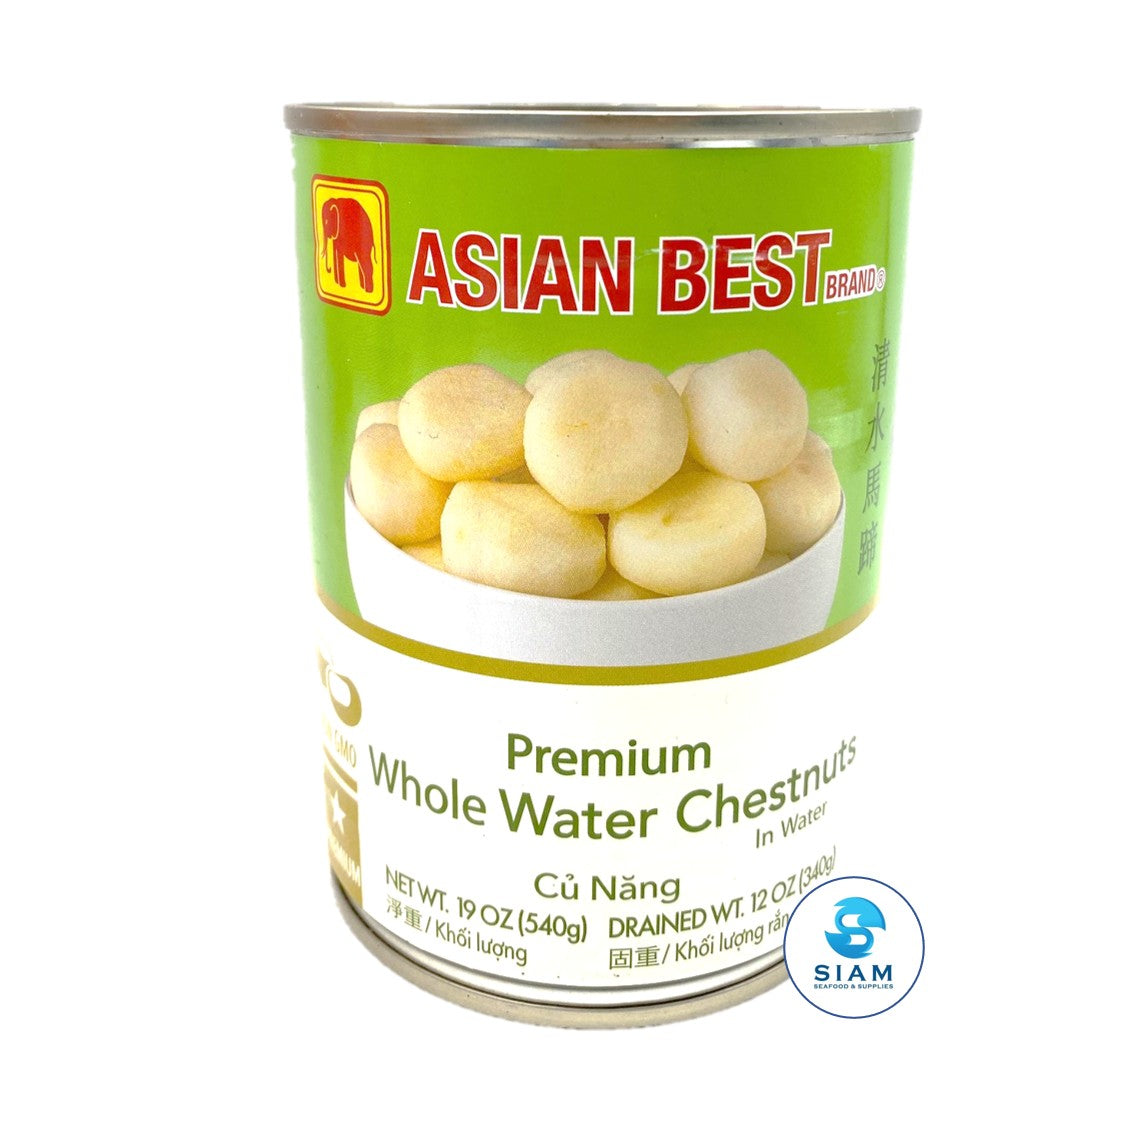 https://siamstore.us/cdn/shop/products/Whole-Water-Chestnuts-in-Water---Asian-Best-_Drained-Wt-12-oz-Net-Wt-23.4-oz_---------------shippable-Asian-Best-1649003188.jpg?v=1649003189